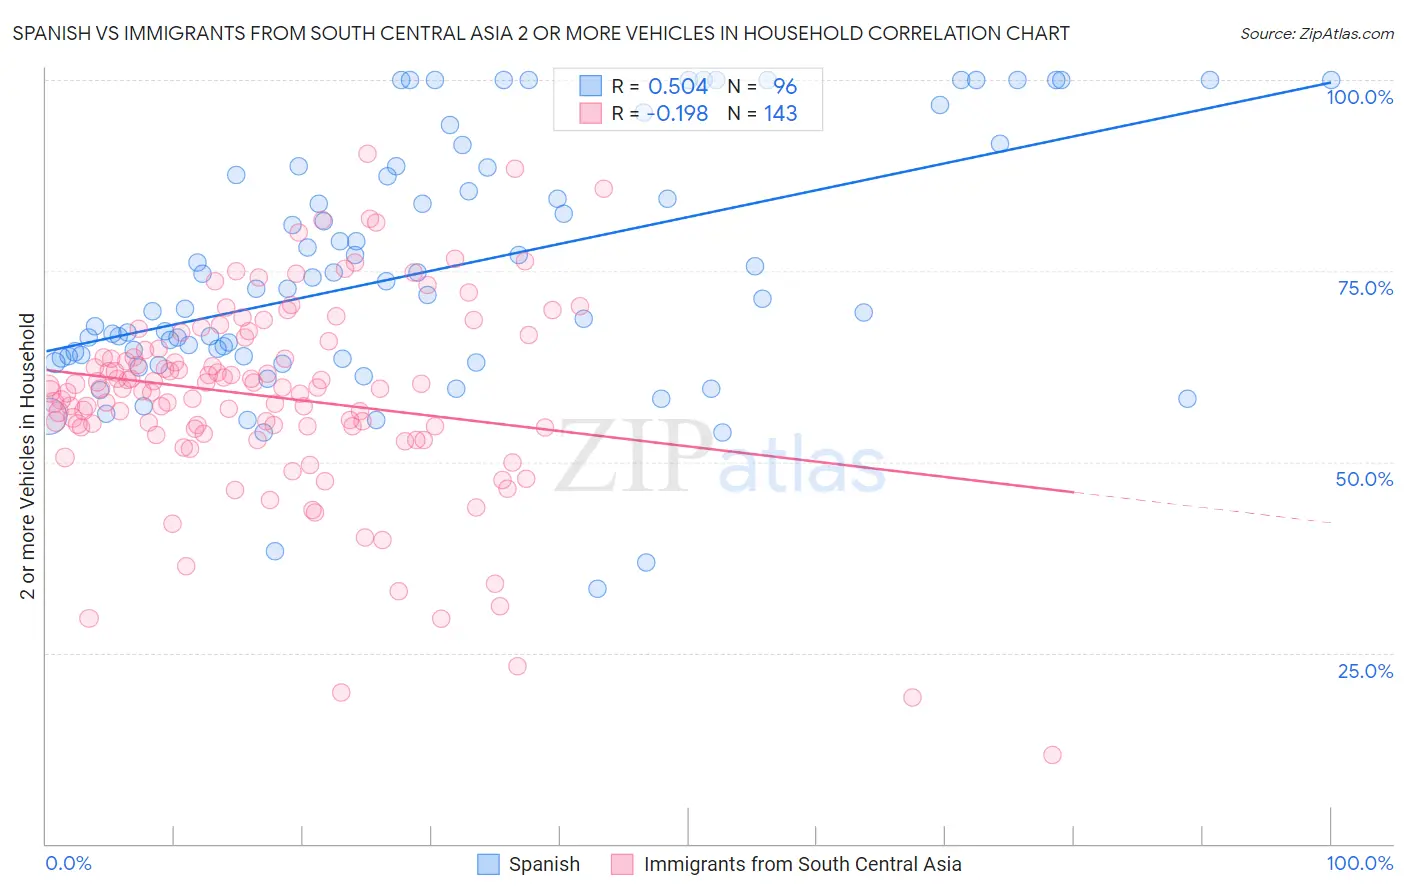 Spanish vs Immigrants from South Central Asia 2 or more Vehicles in Household